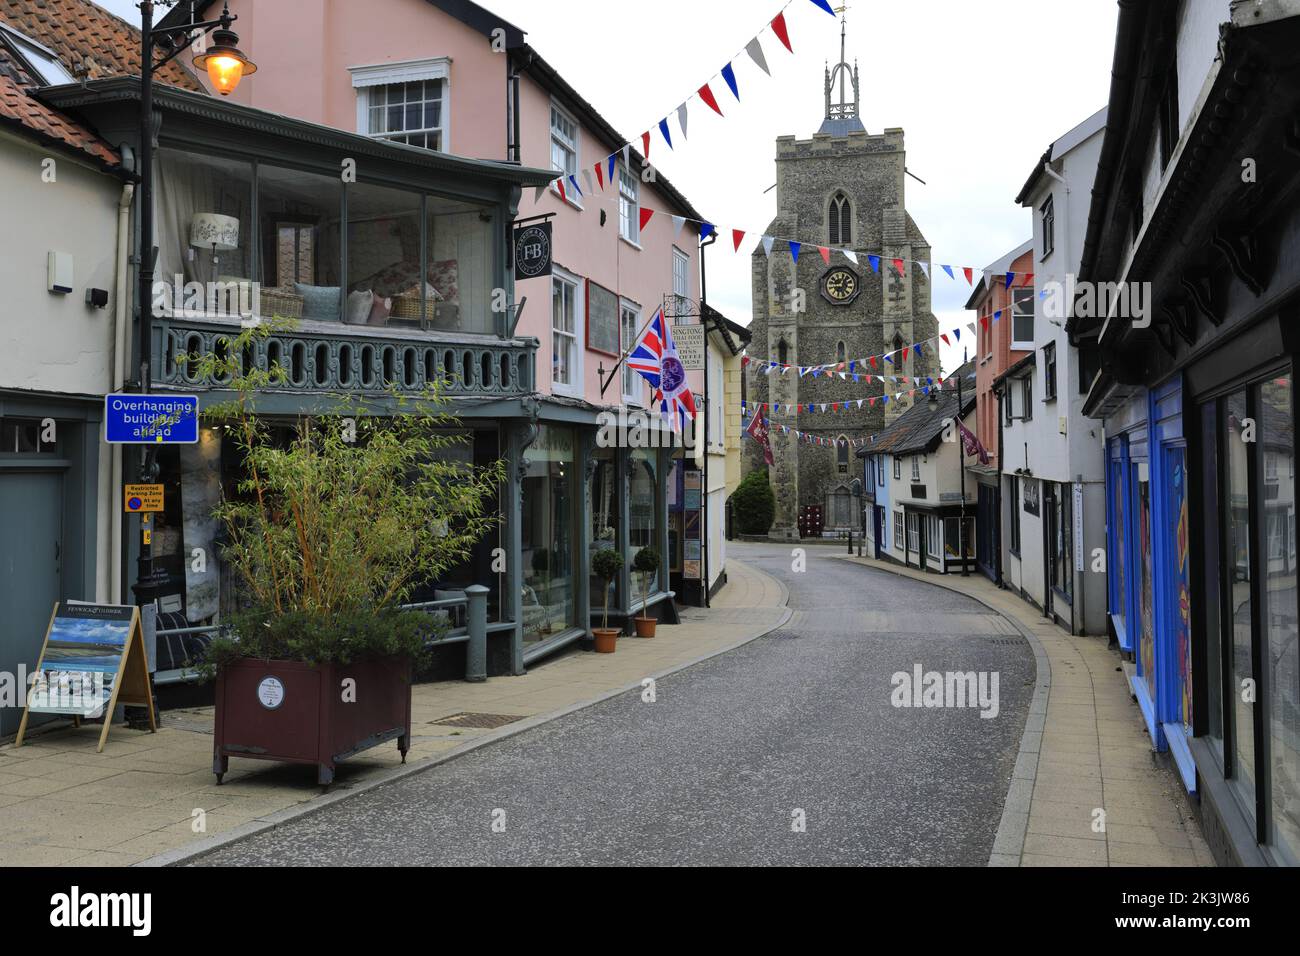 View of the market town of Diss, Norfolk, England, Britain, UK Stock Photo